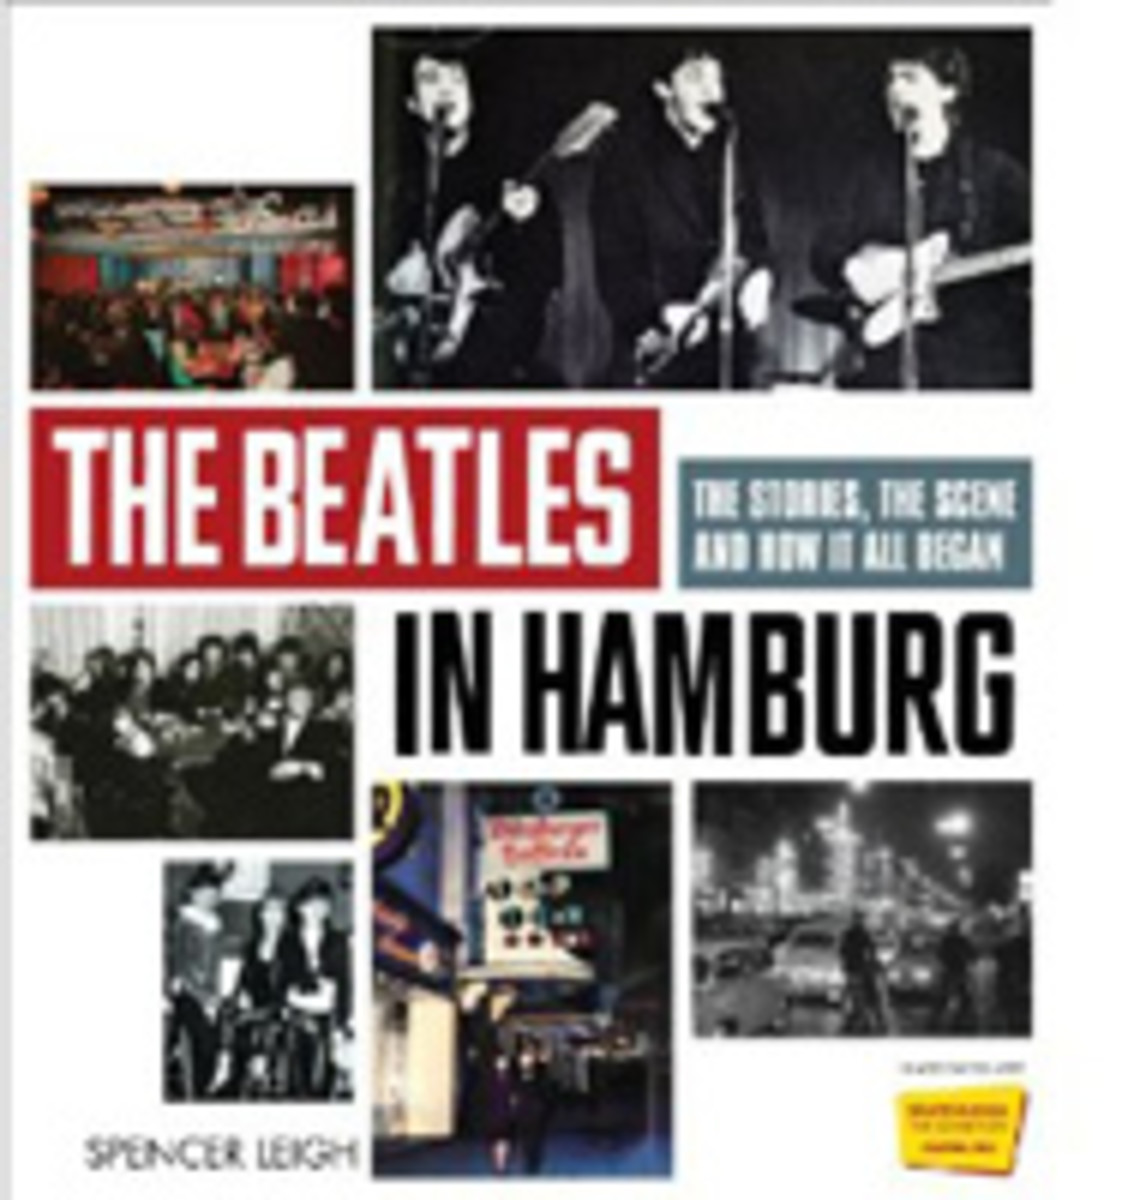 The Beatles In Hamburg by Spencer Leigh